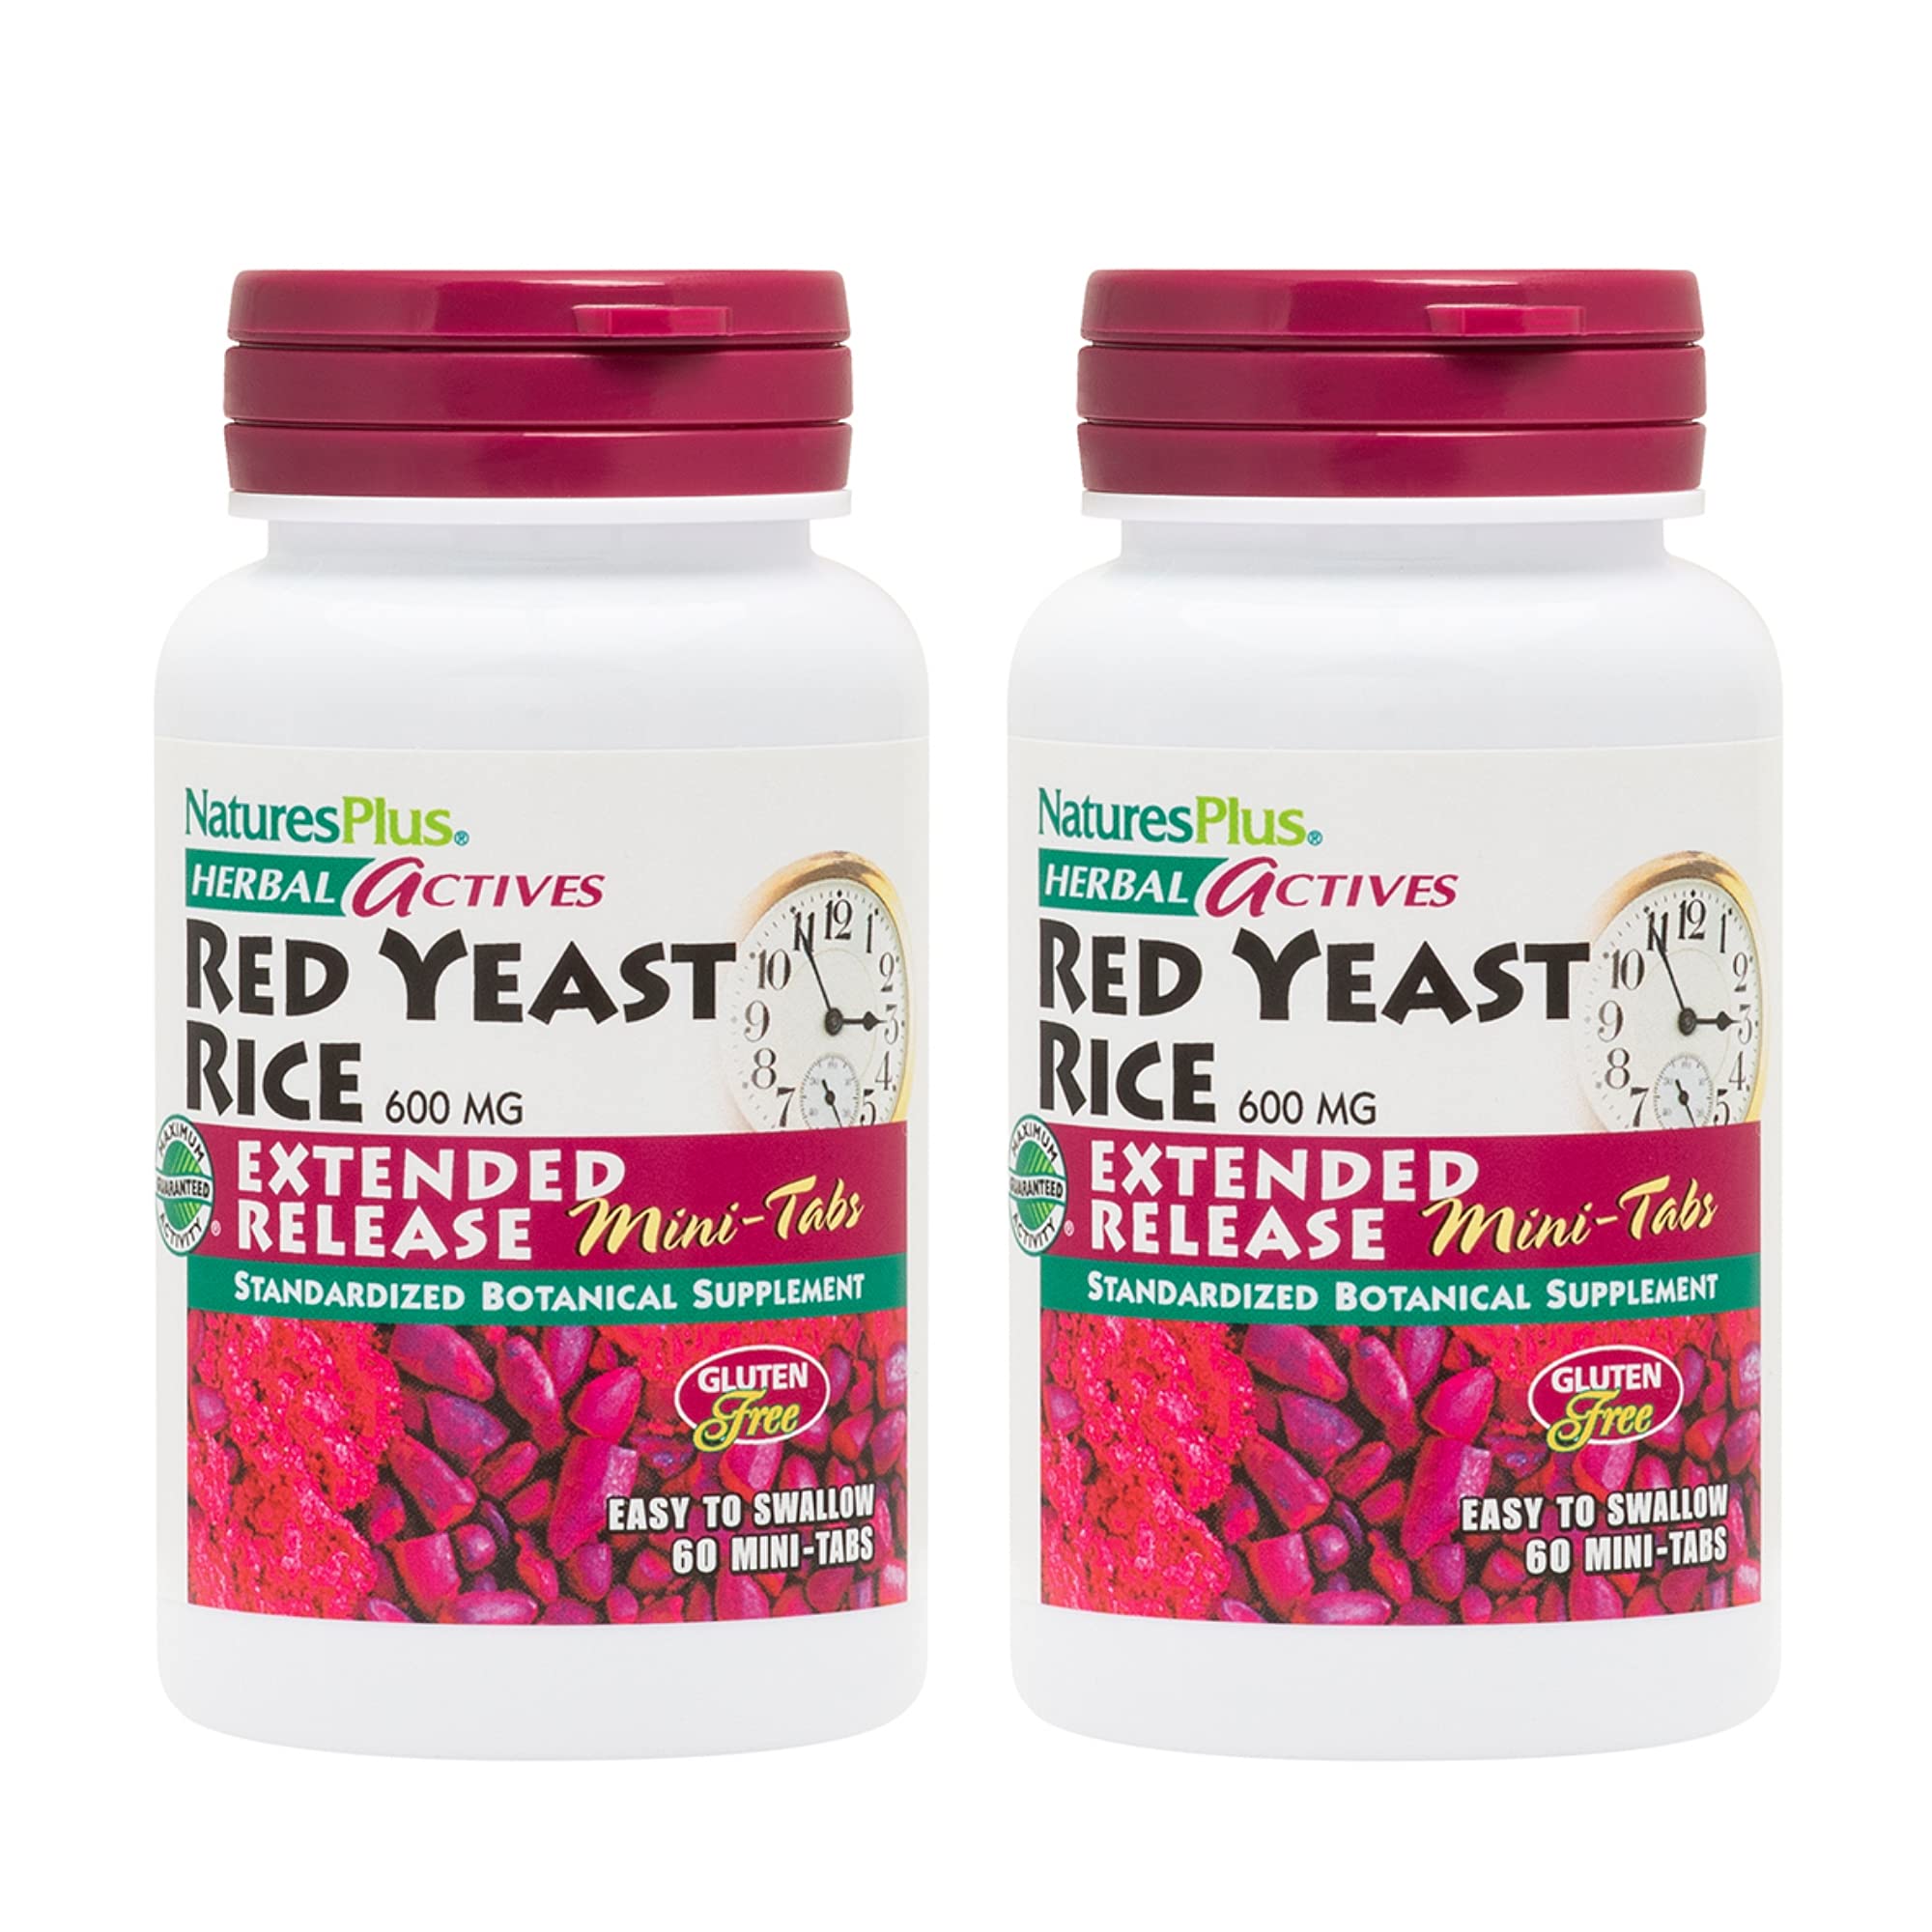 NaturesPlus Herbal Actives Red Yeast Rice Extended Release 600 mg - 120 Mini-Tabs, Pack of 2 - Supports General Well-Being - Vegetarian, Gluten Fre...